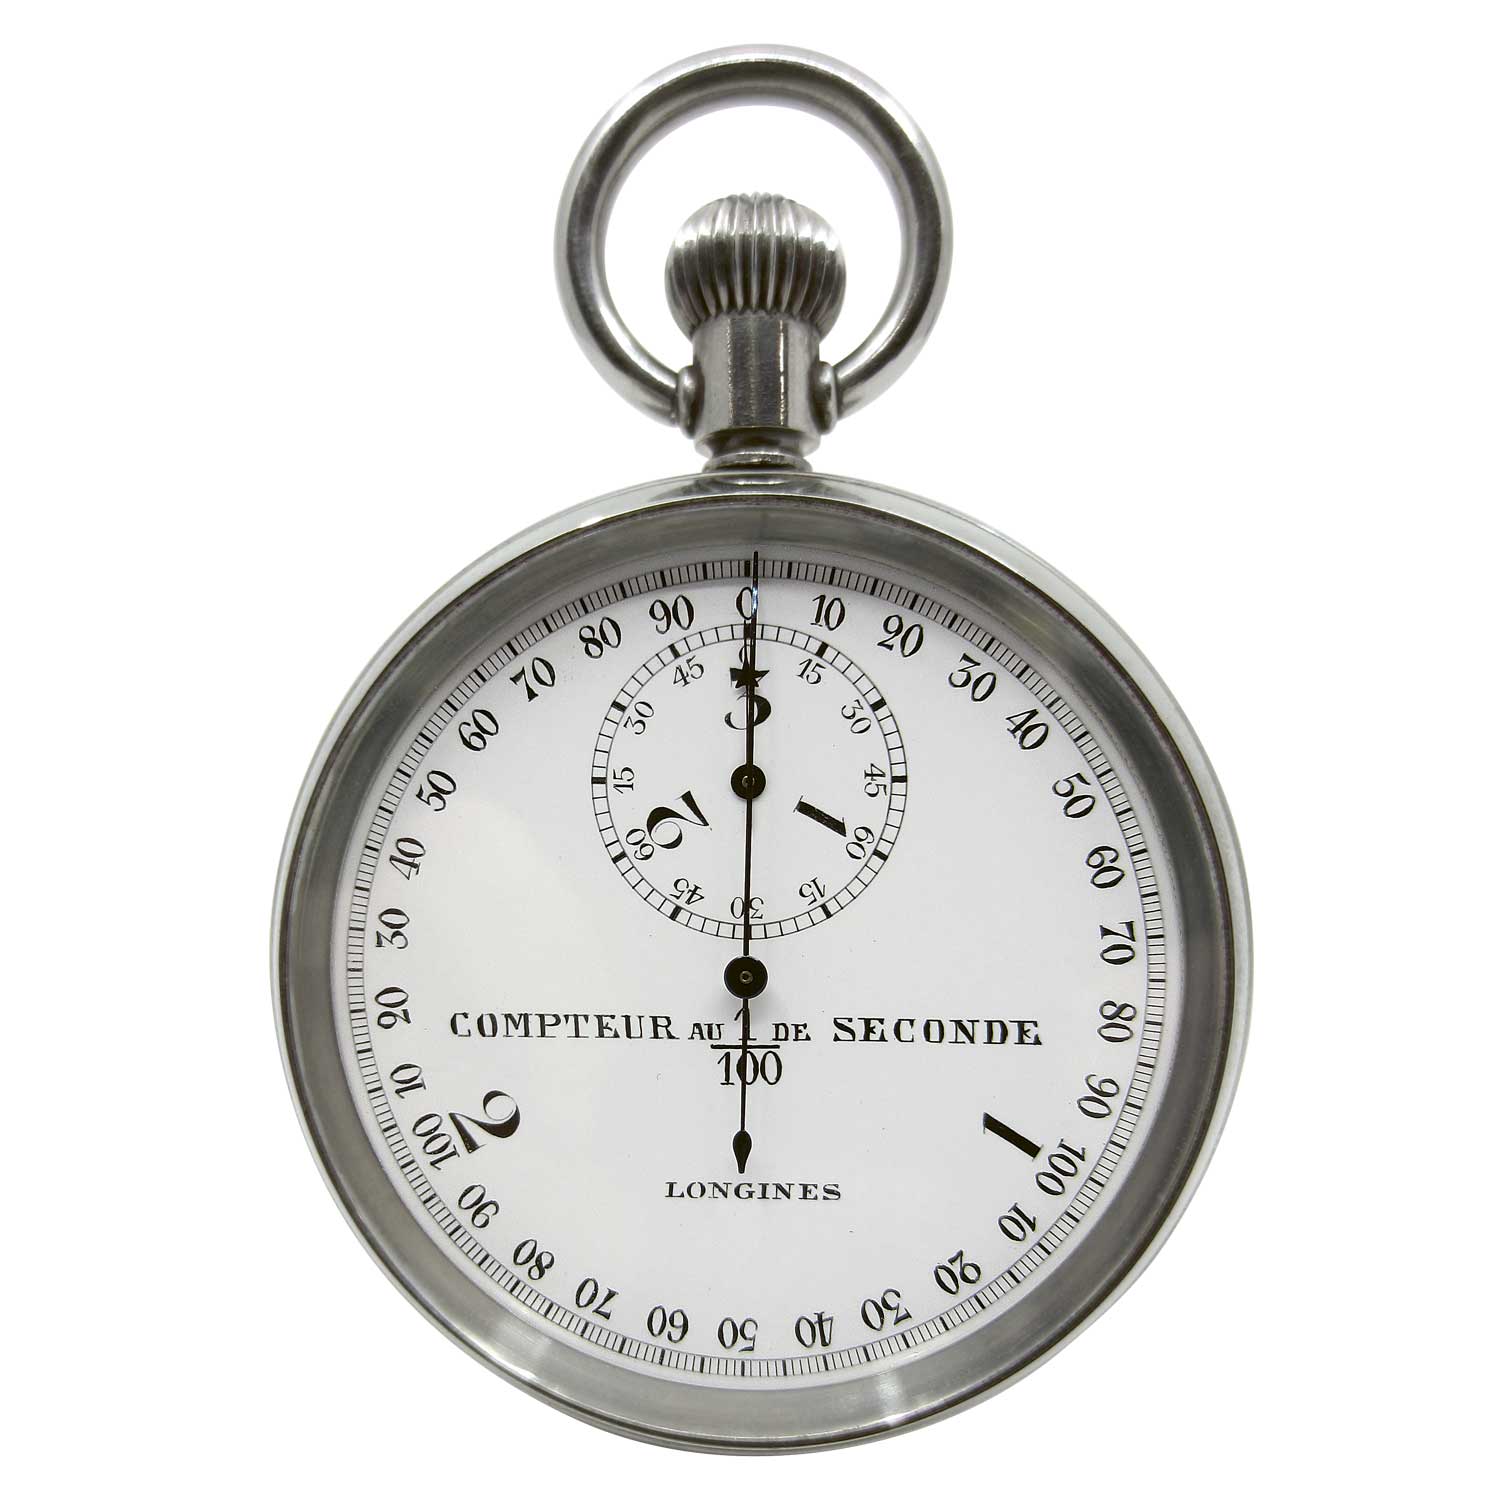 1916: Stopwatch with 50 Hz high-frequency movement to measure 1/100th of a second (Caliber 19.73N)